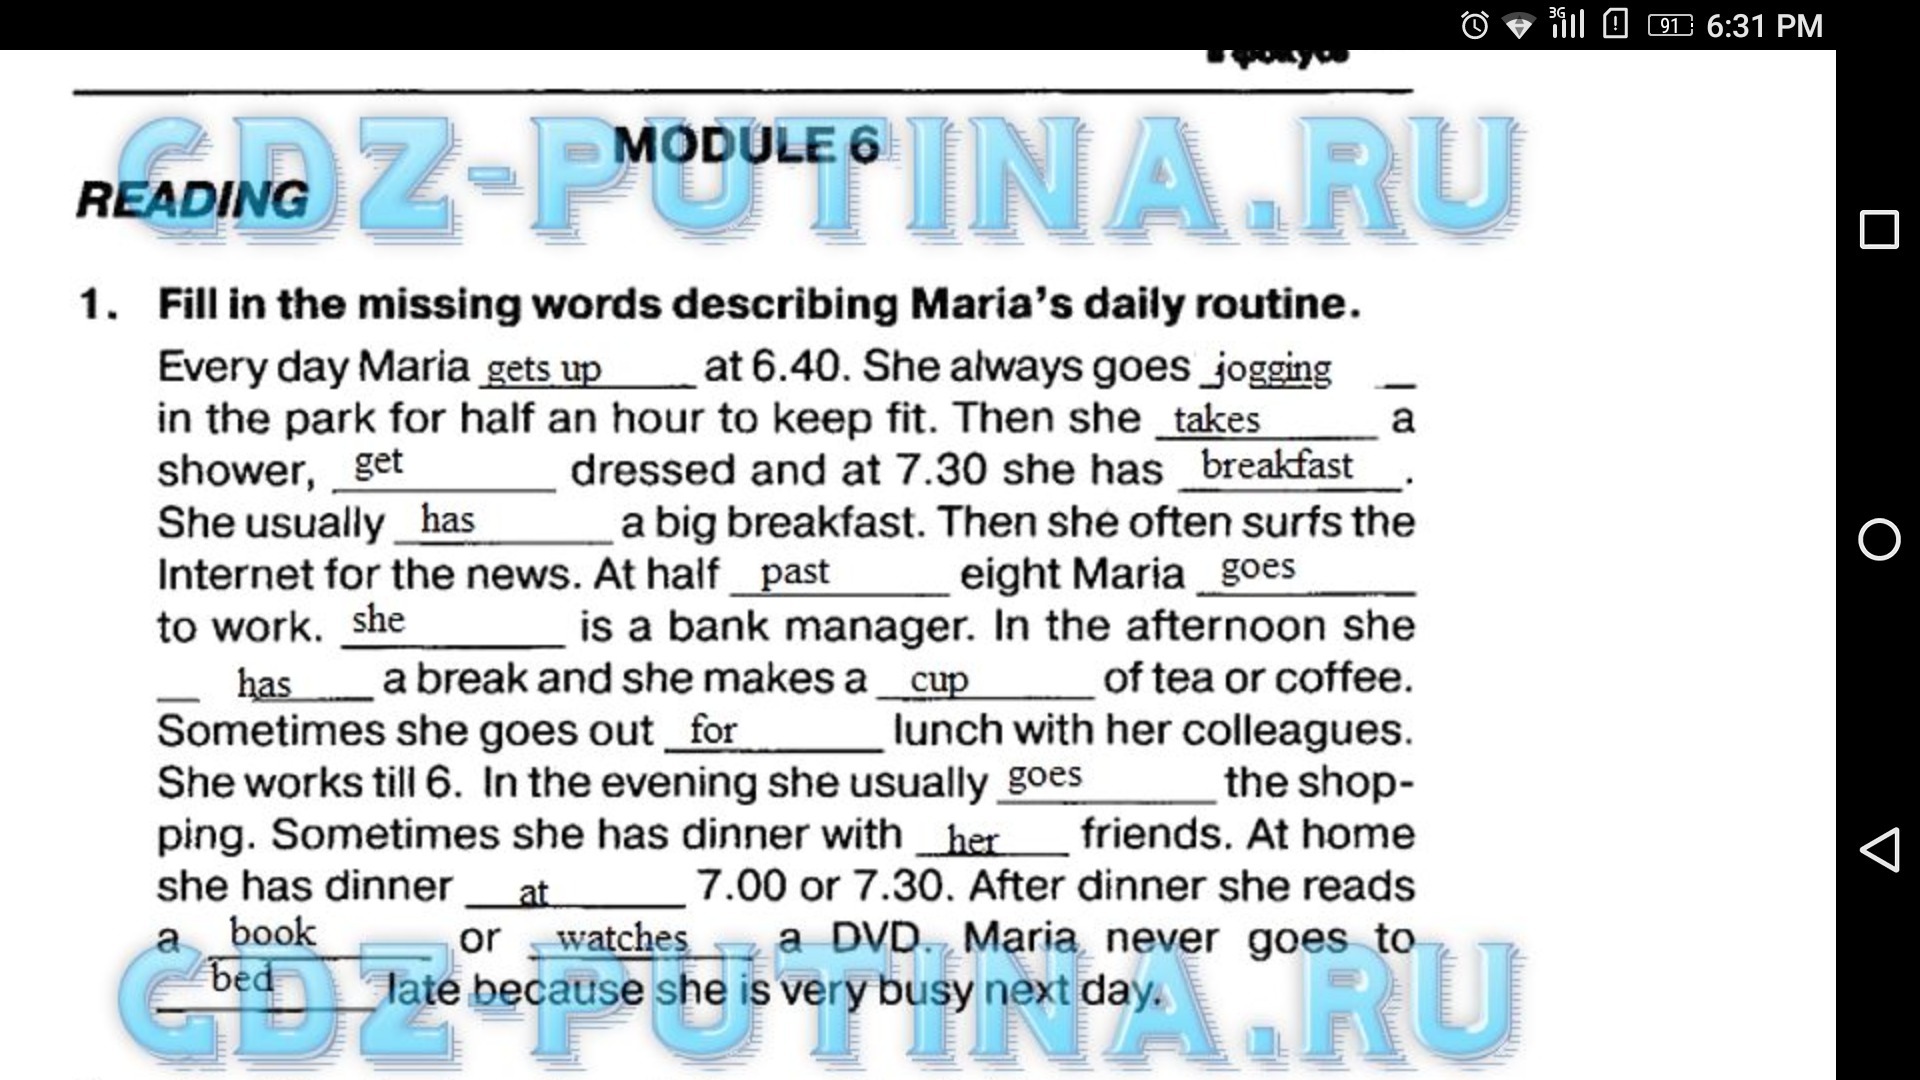 He always goes to work by car. Fill in the missing Words describing Maria's Daily Routine 5 класс ответы. Fill in the missing Words describing Maria's Daily Routine ответы. Every Day Maria at 6.40. Missing Word перевод.